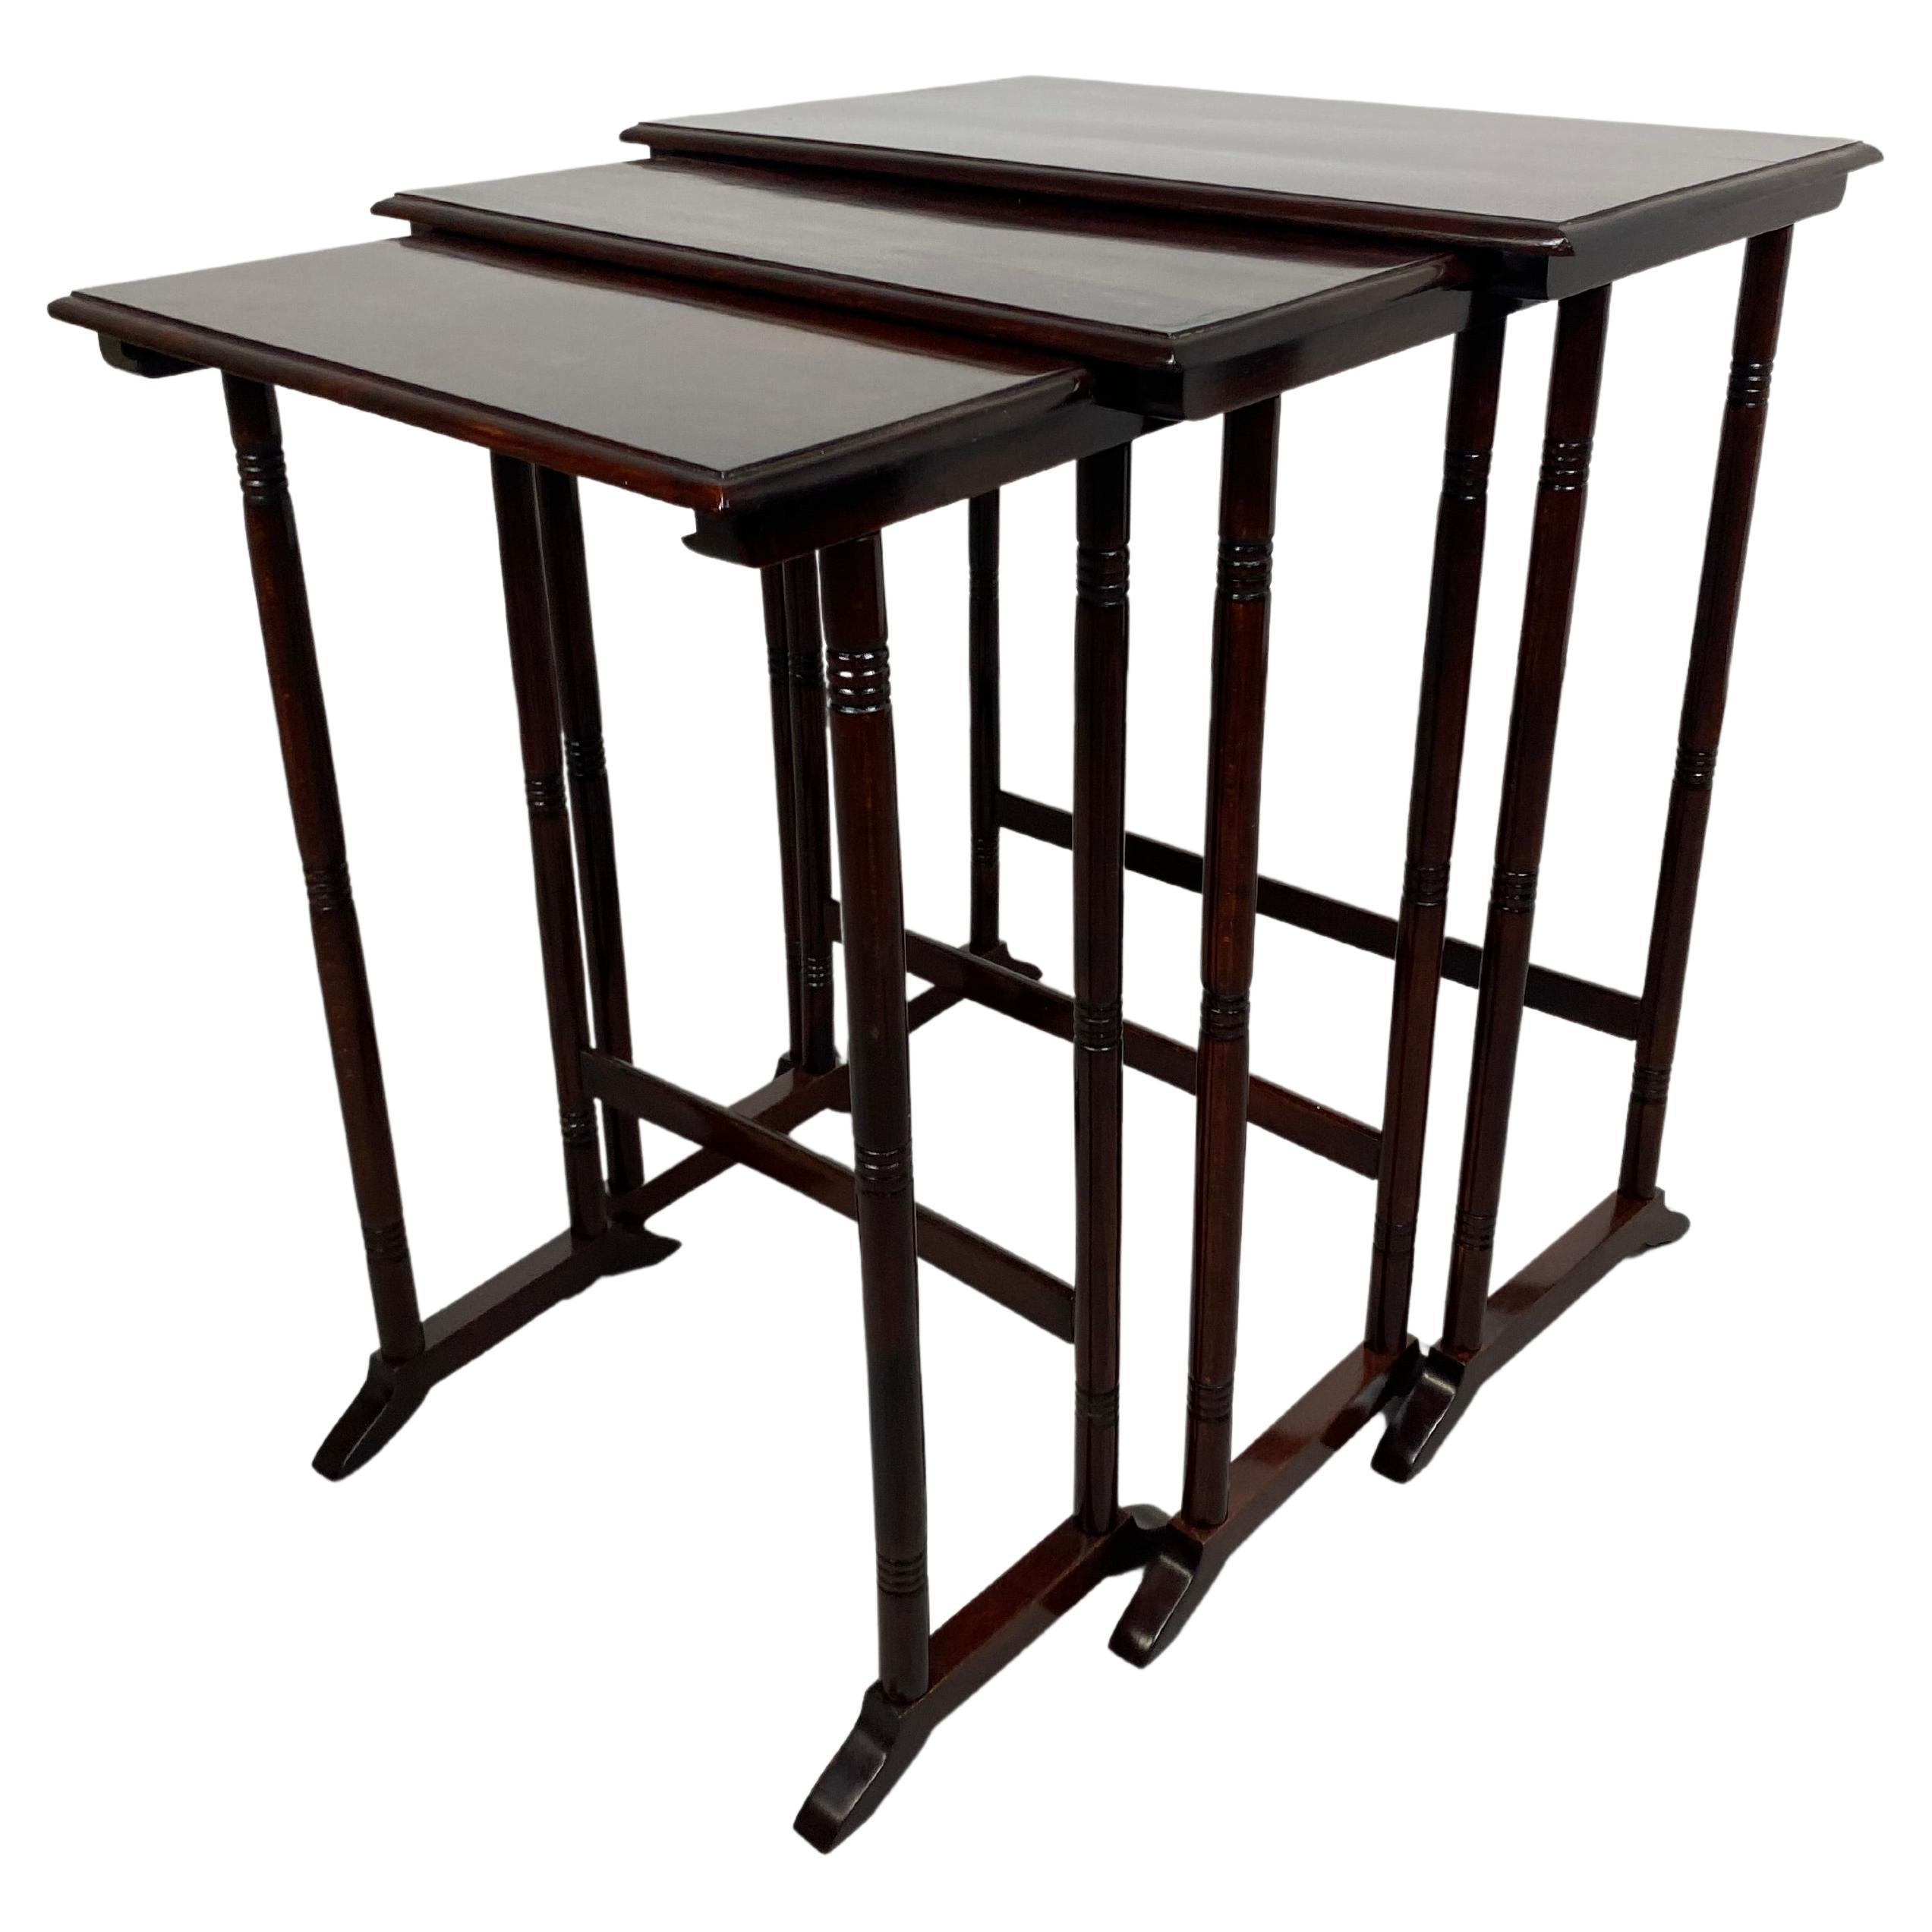 Secession Nesting Tables by Thonet